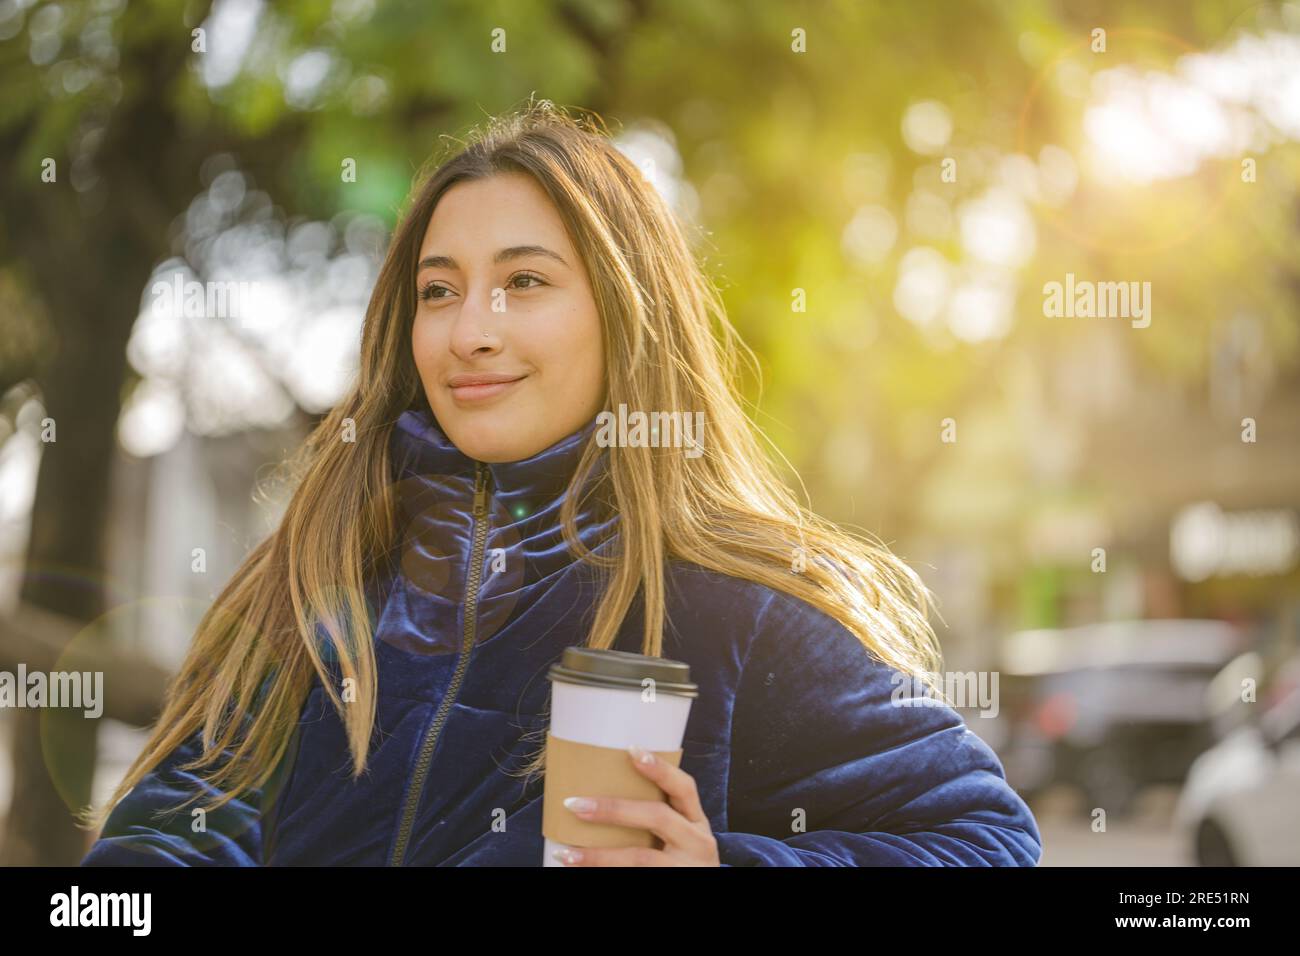 Latin girl drinking coffee sitting on a bench in a public park with copy space. Stock Photo